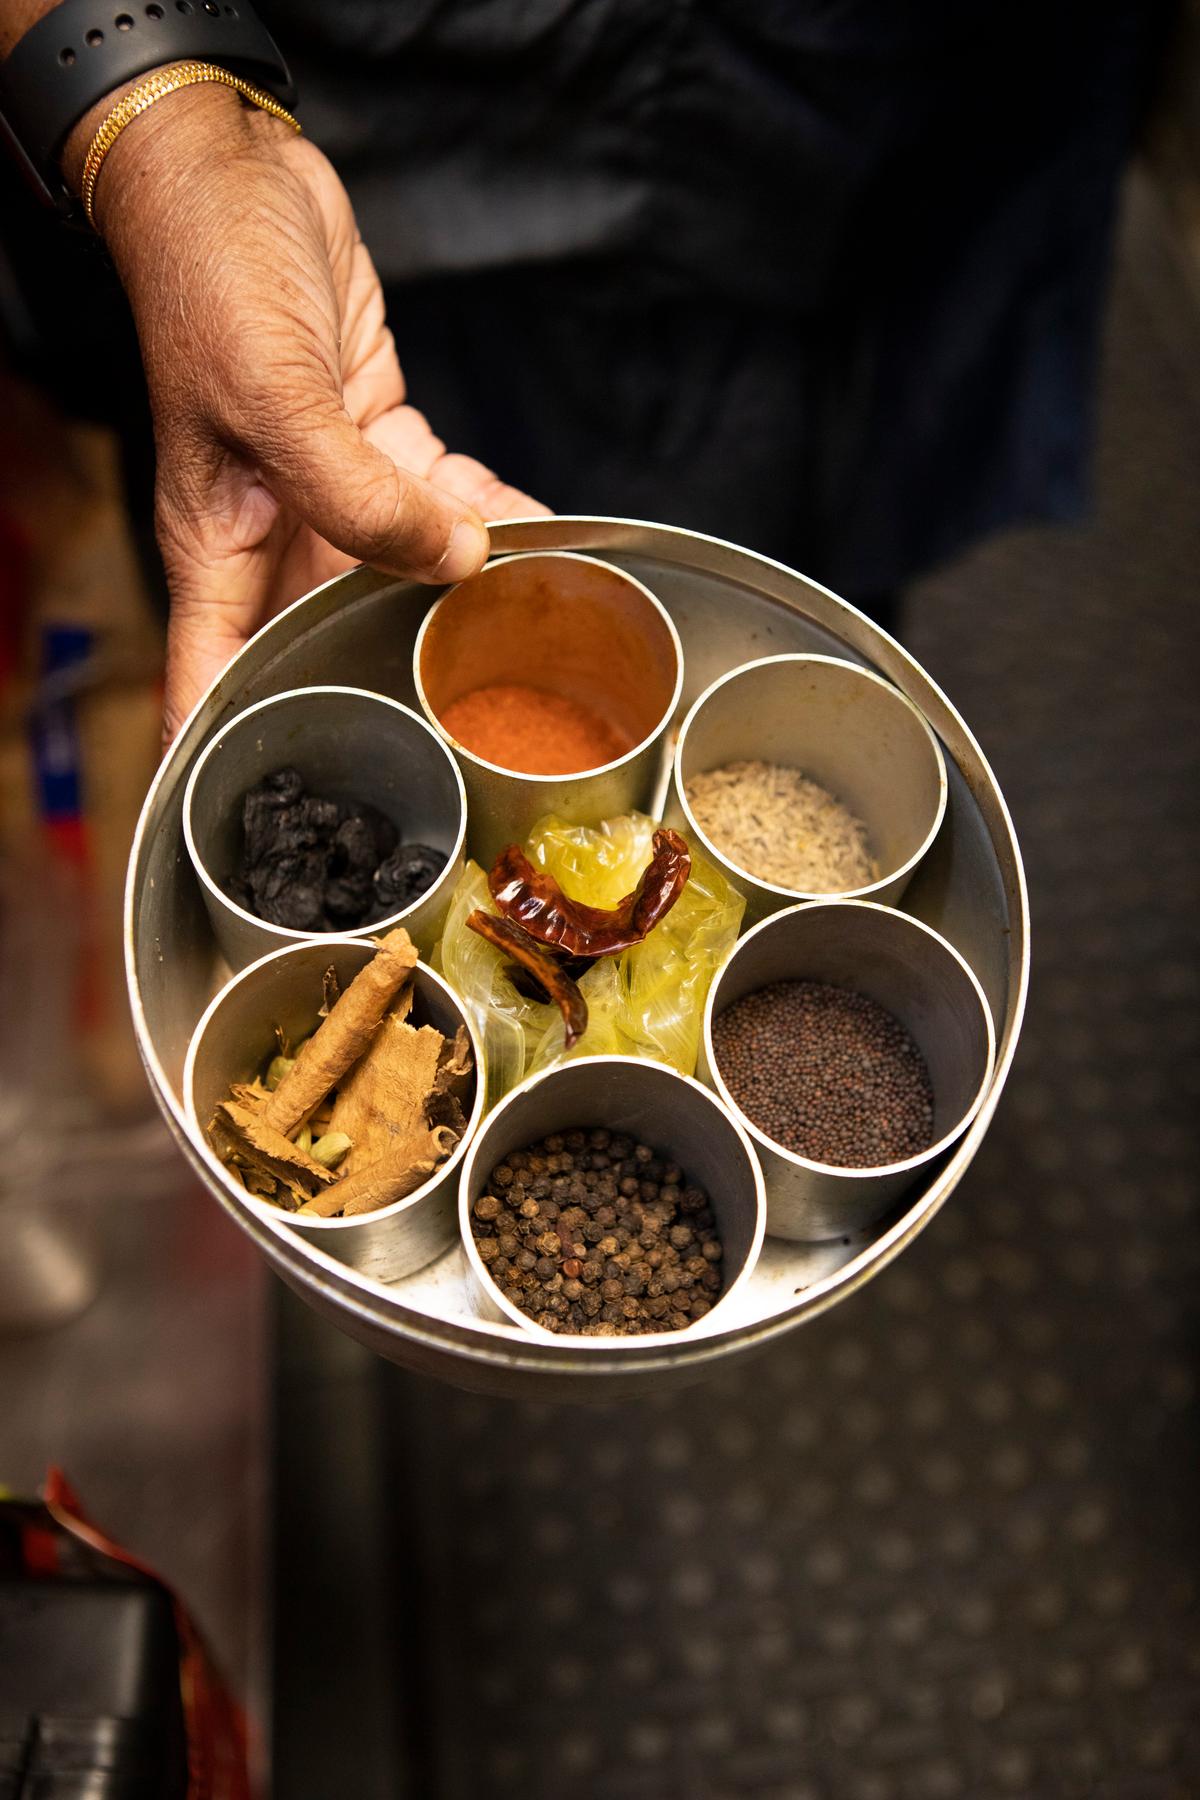 A tin of spices belonging to Nonna Dolly, who cooks Sri Lankan specialties with ingredients sourced locally and brought from visits to her home country. (Adhiraj Chakrabarti)